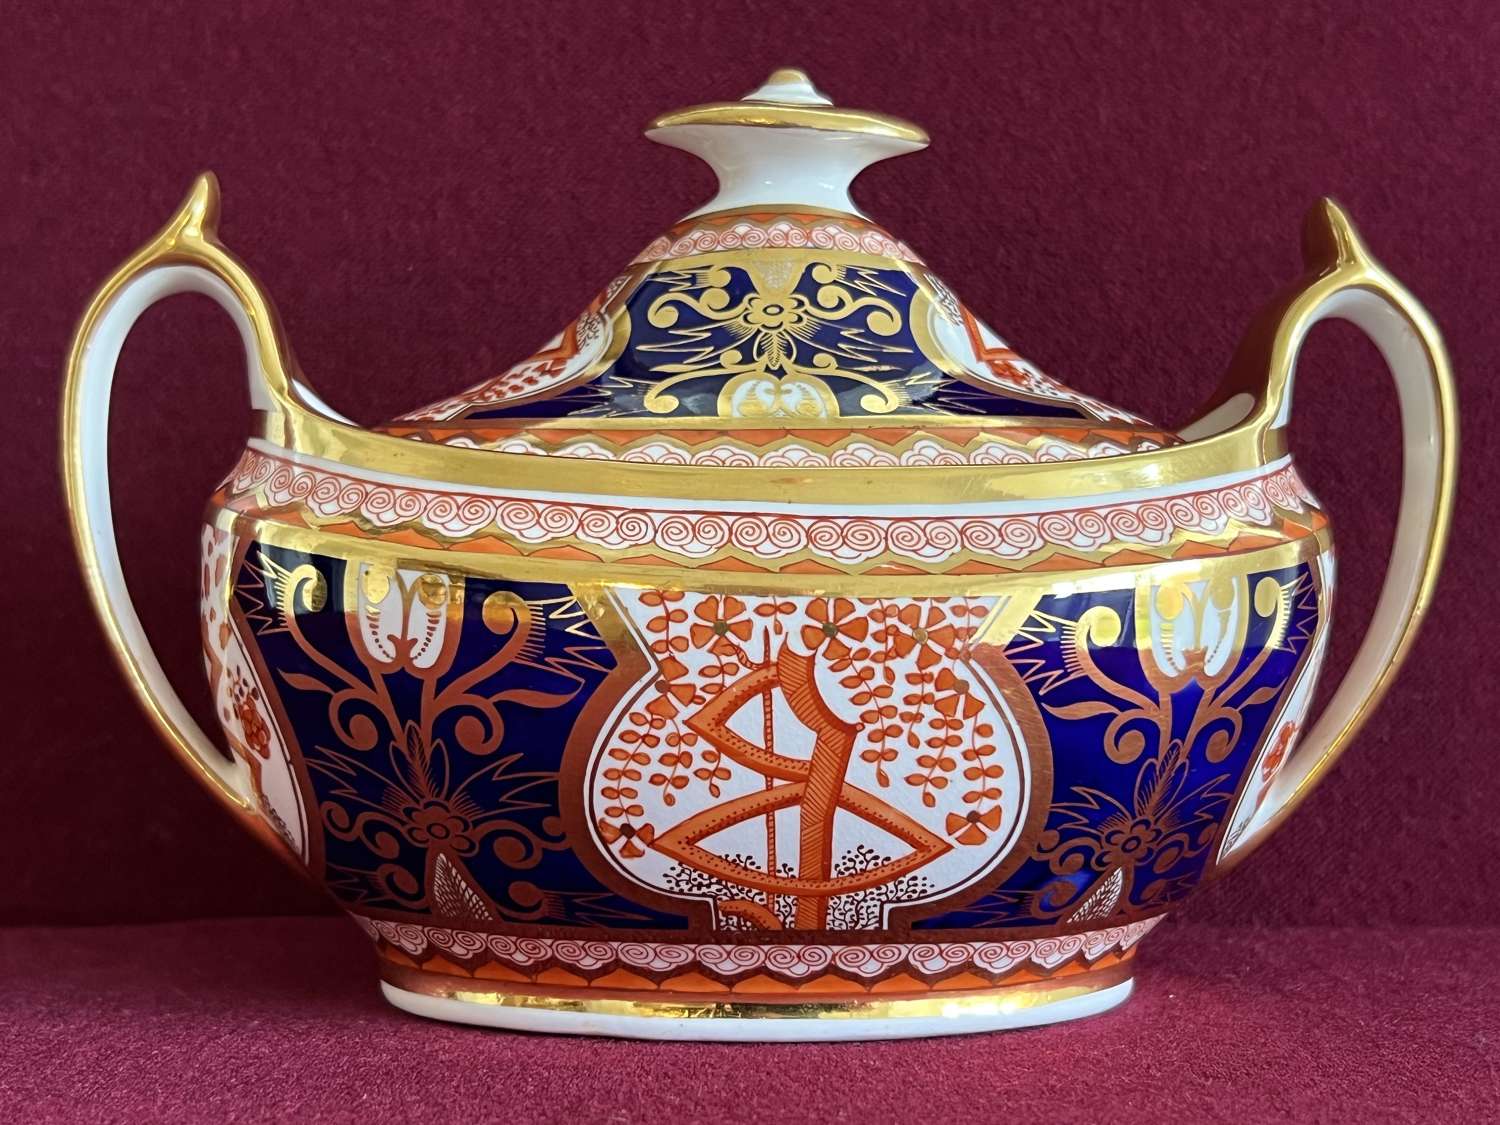 A Spode porcelain Sucrier in pattern 715 the 'Dollar' pattern c.1804